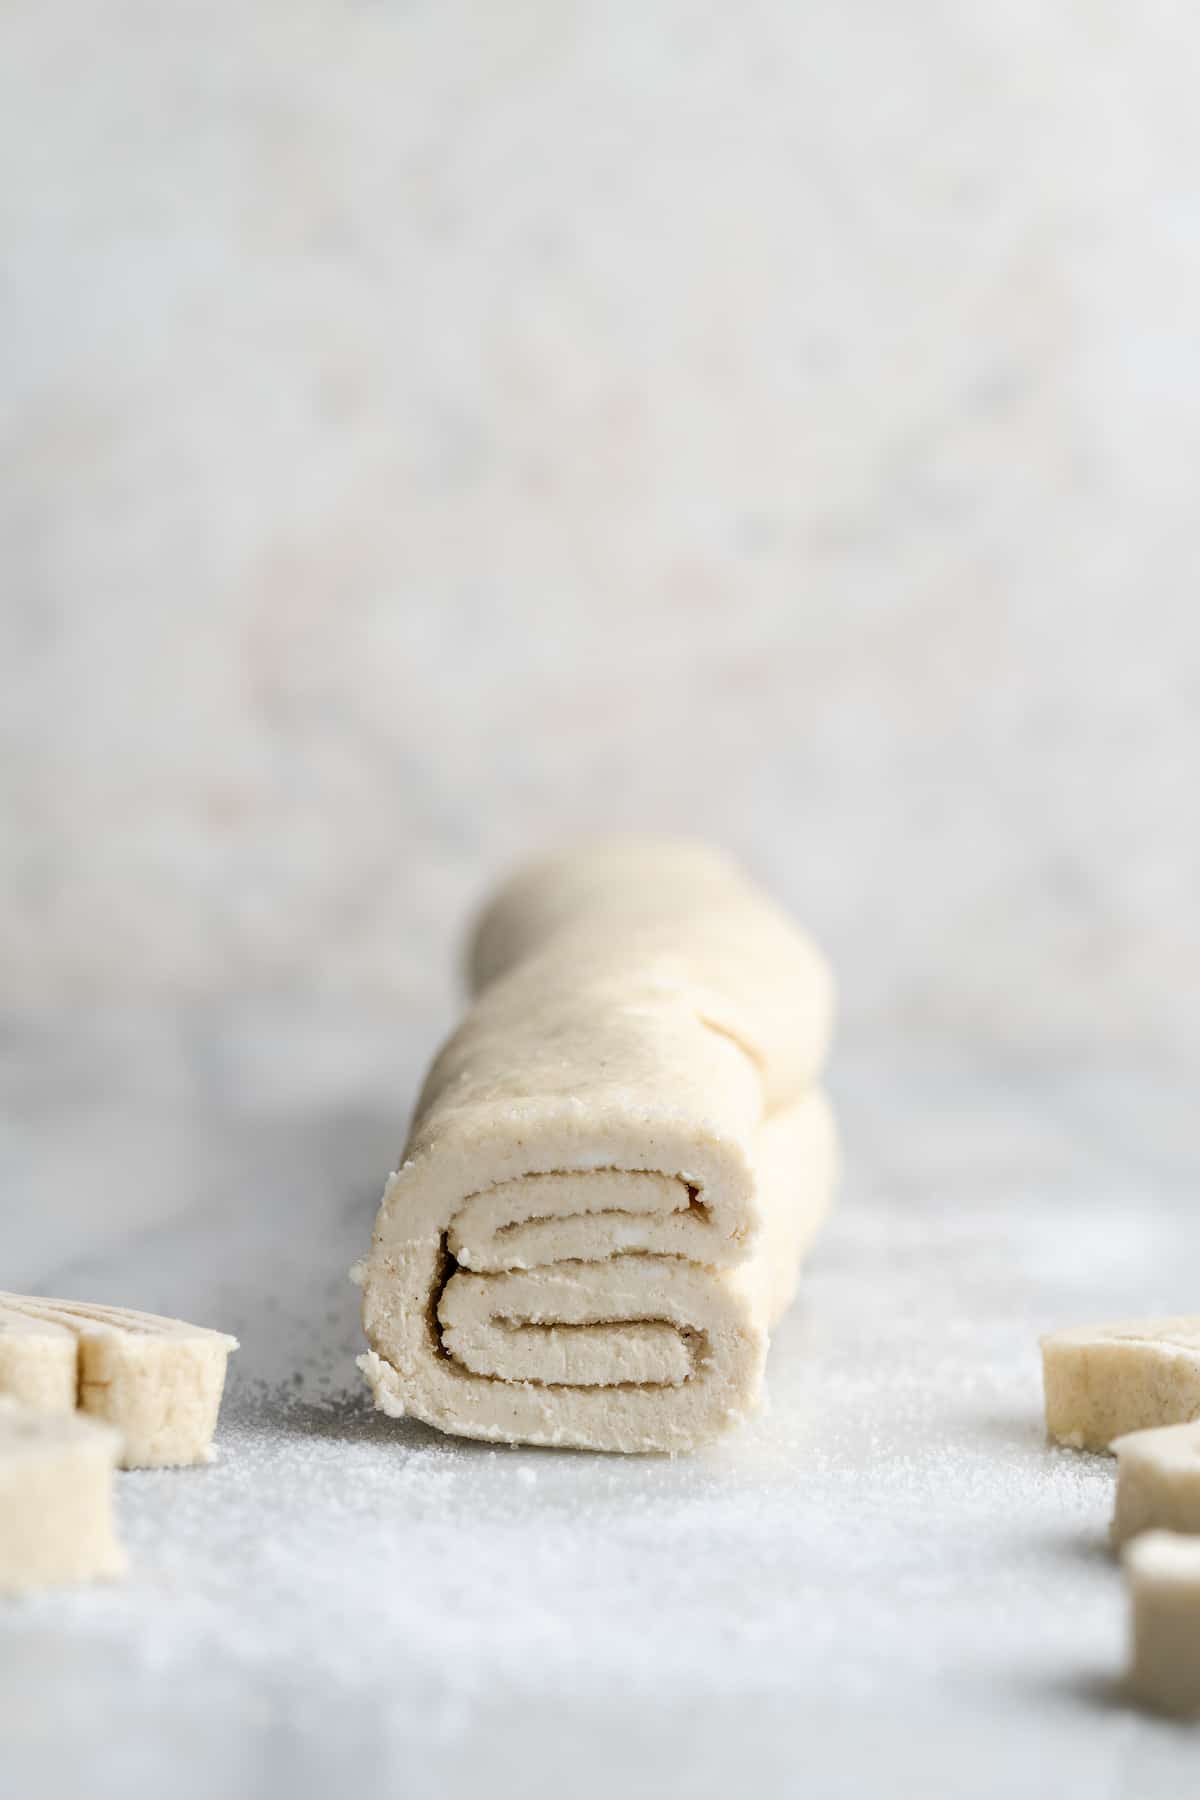 Cross section of puff pastry palmier dough folded onto itself